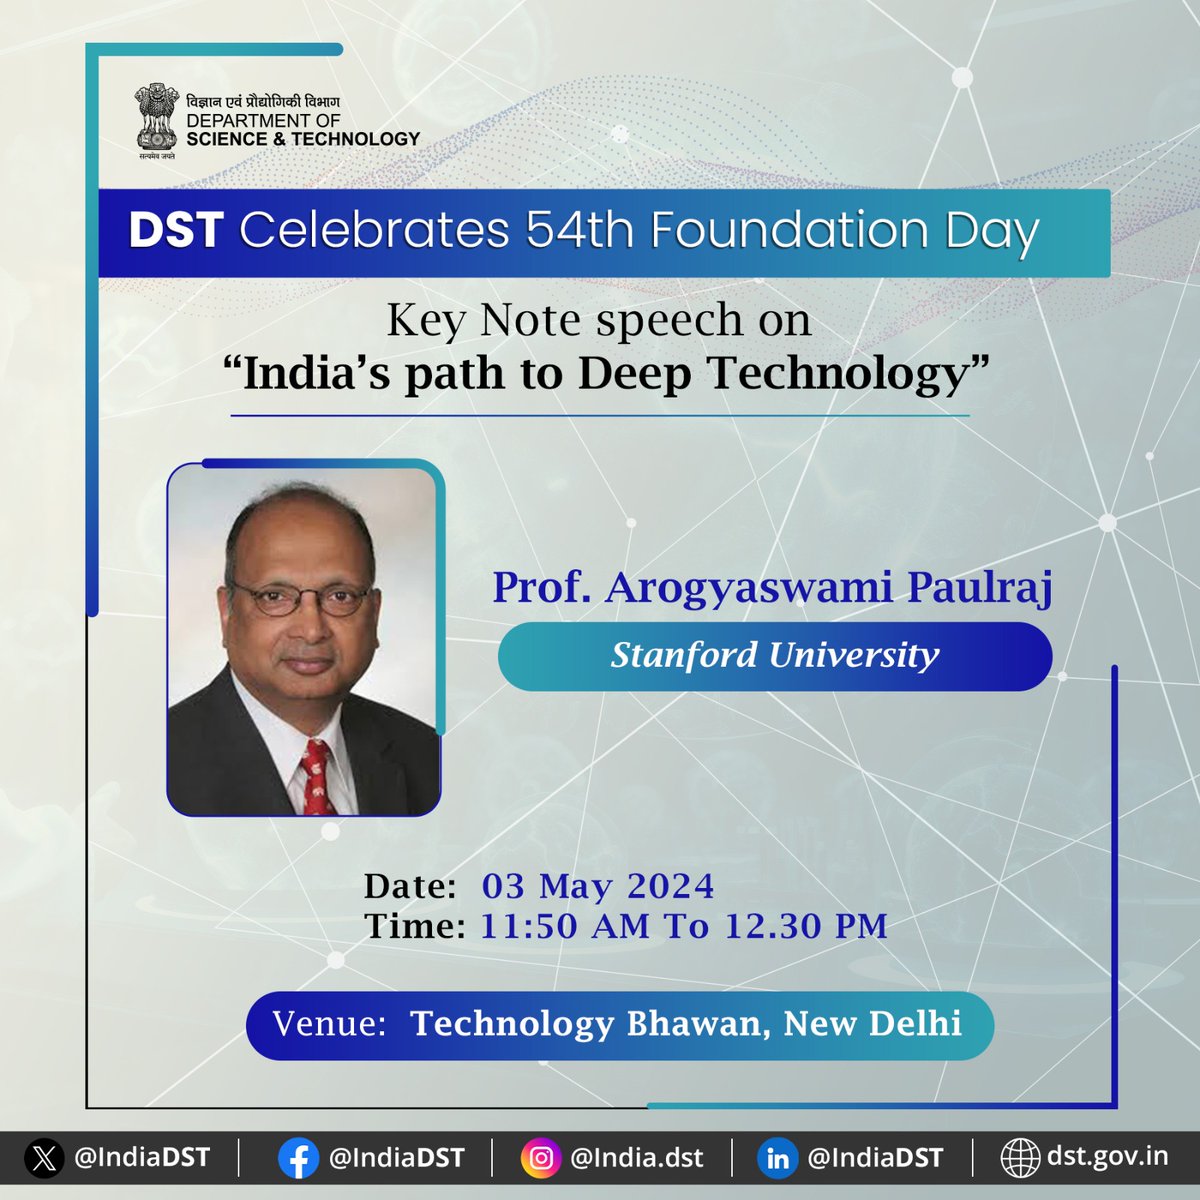 Greatly excited to host eminent scientist, Prof. Arogyaswami Paulraj, Professor Emeritus at Department of Electrical Engineering, @Stanford University who will deliver the keynote speech on 'India's Path to Deep Technology'on the occasion of DST's 54th Foundation Day.